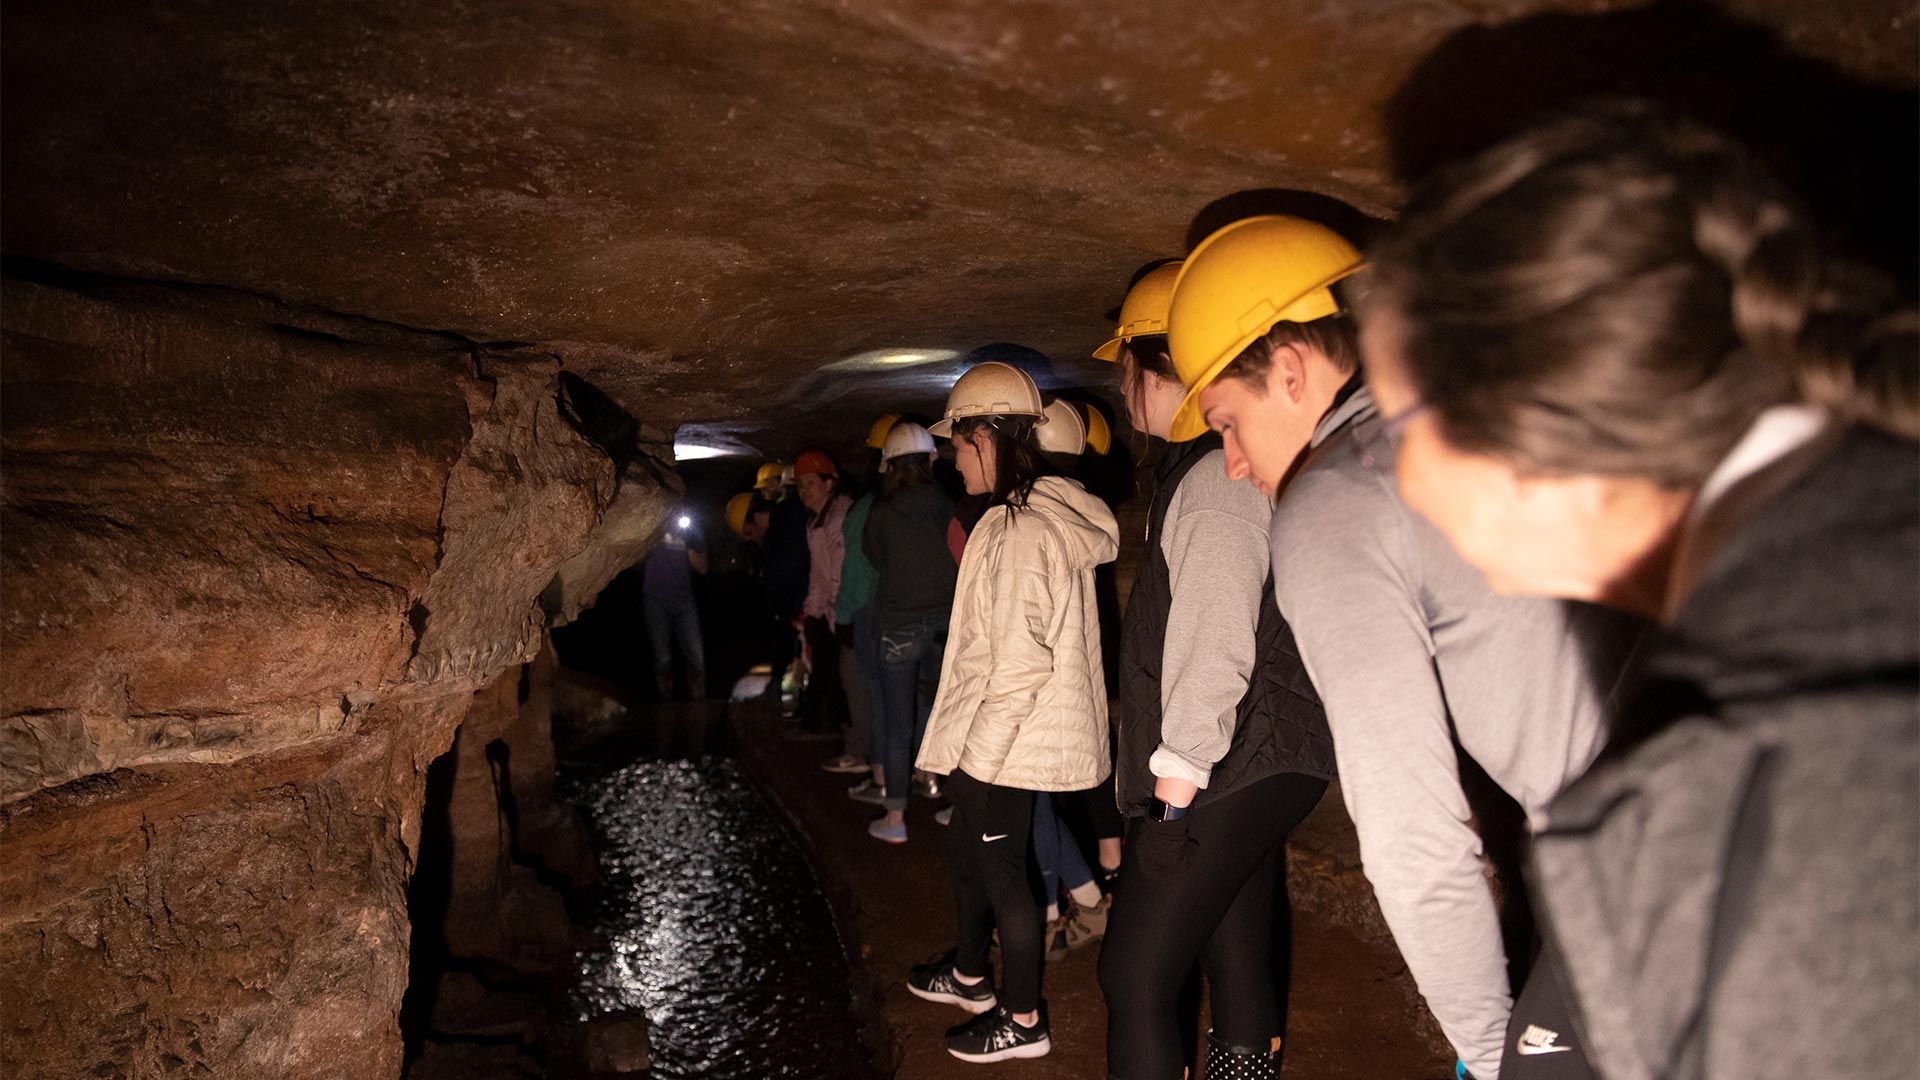 Students on a field trip, underground, in a local cave. They are wearing hard hats and using flashlights to see the cave features.